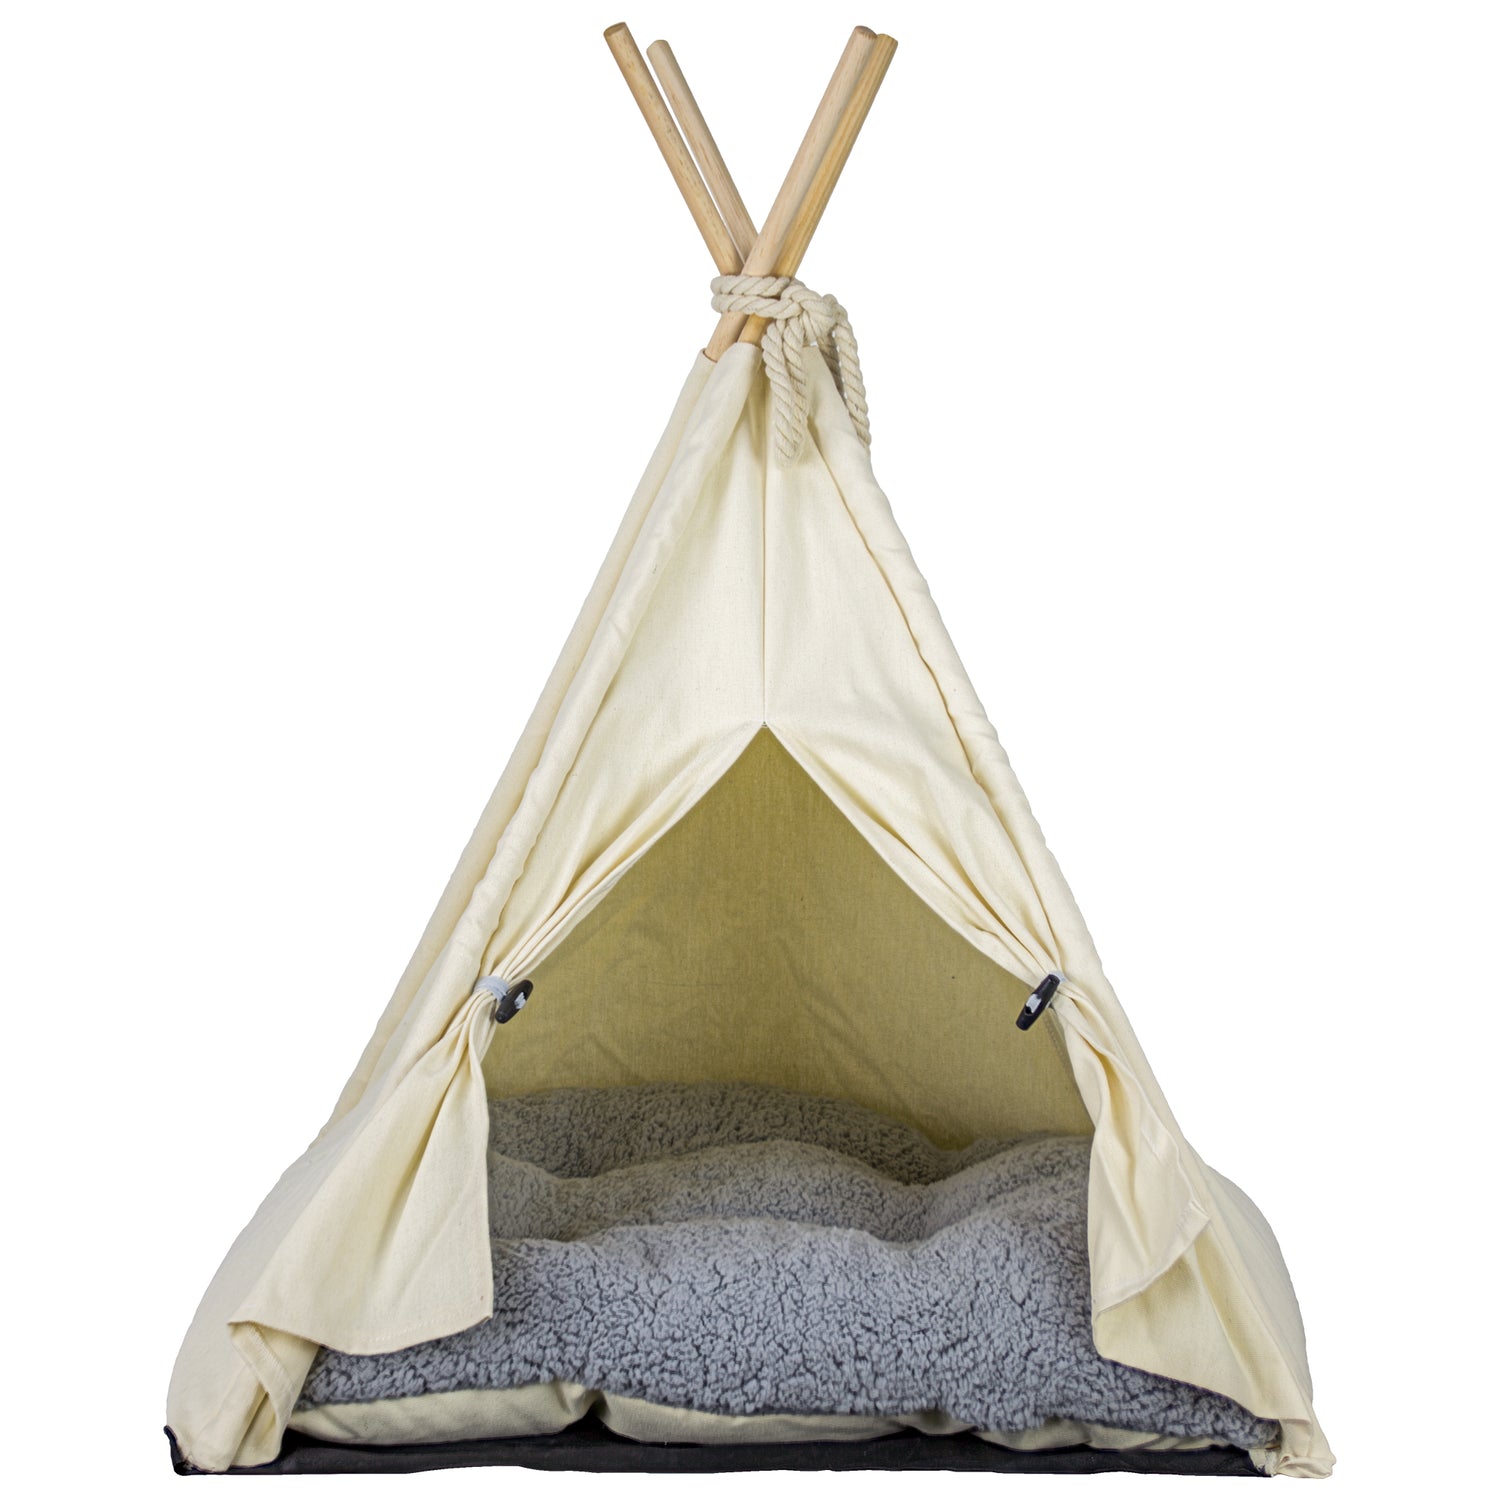 American Art Decor Pet Teepee Portable Dog & Cat Bed with Cushion - Beige